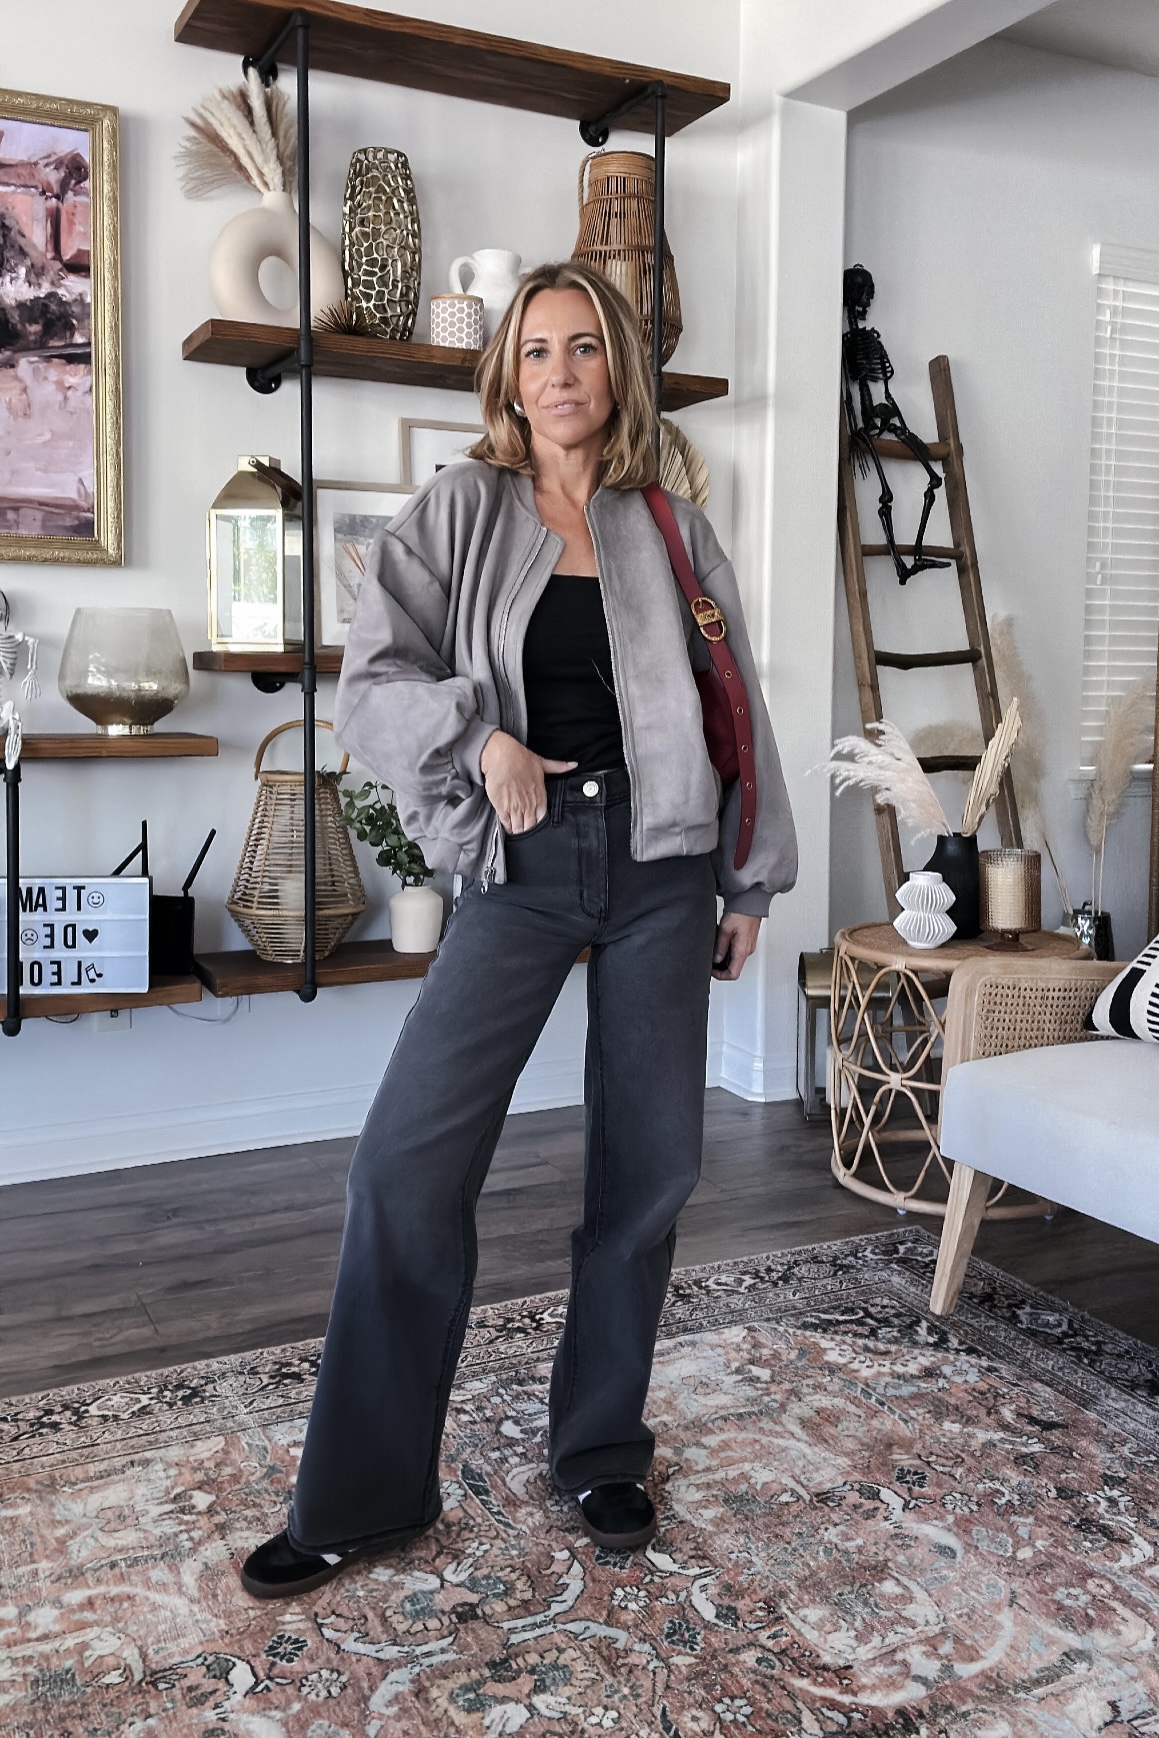 EASY FALL OUTFITS FROM KOHLS-Jaclyn De Leon style. I found some great new items at Kohls. Everything is so affordable and on trend for this fall season.